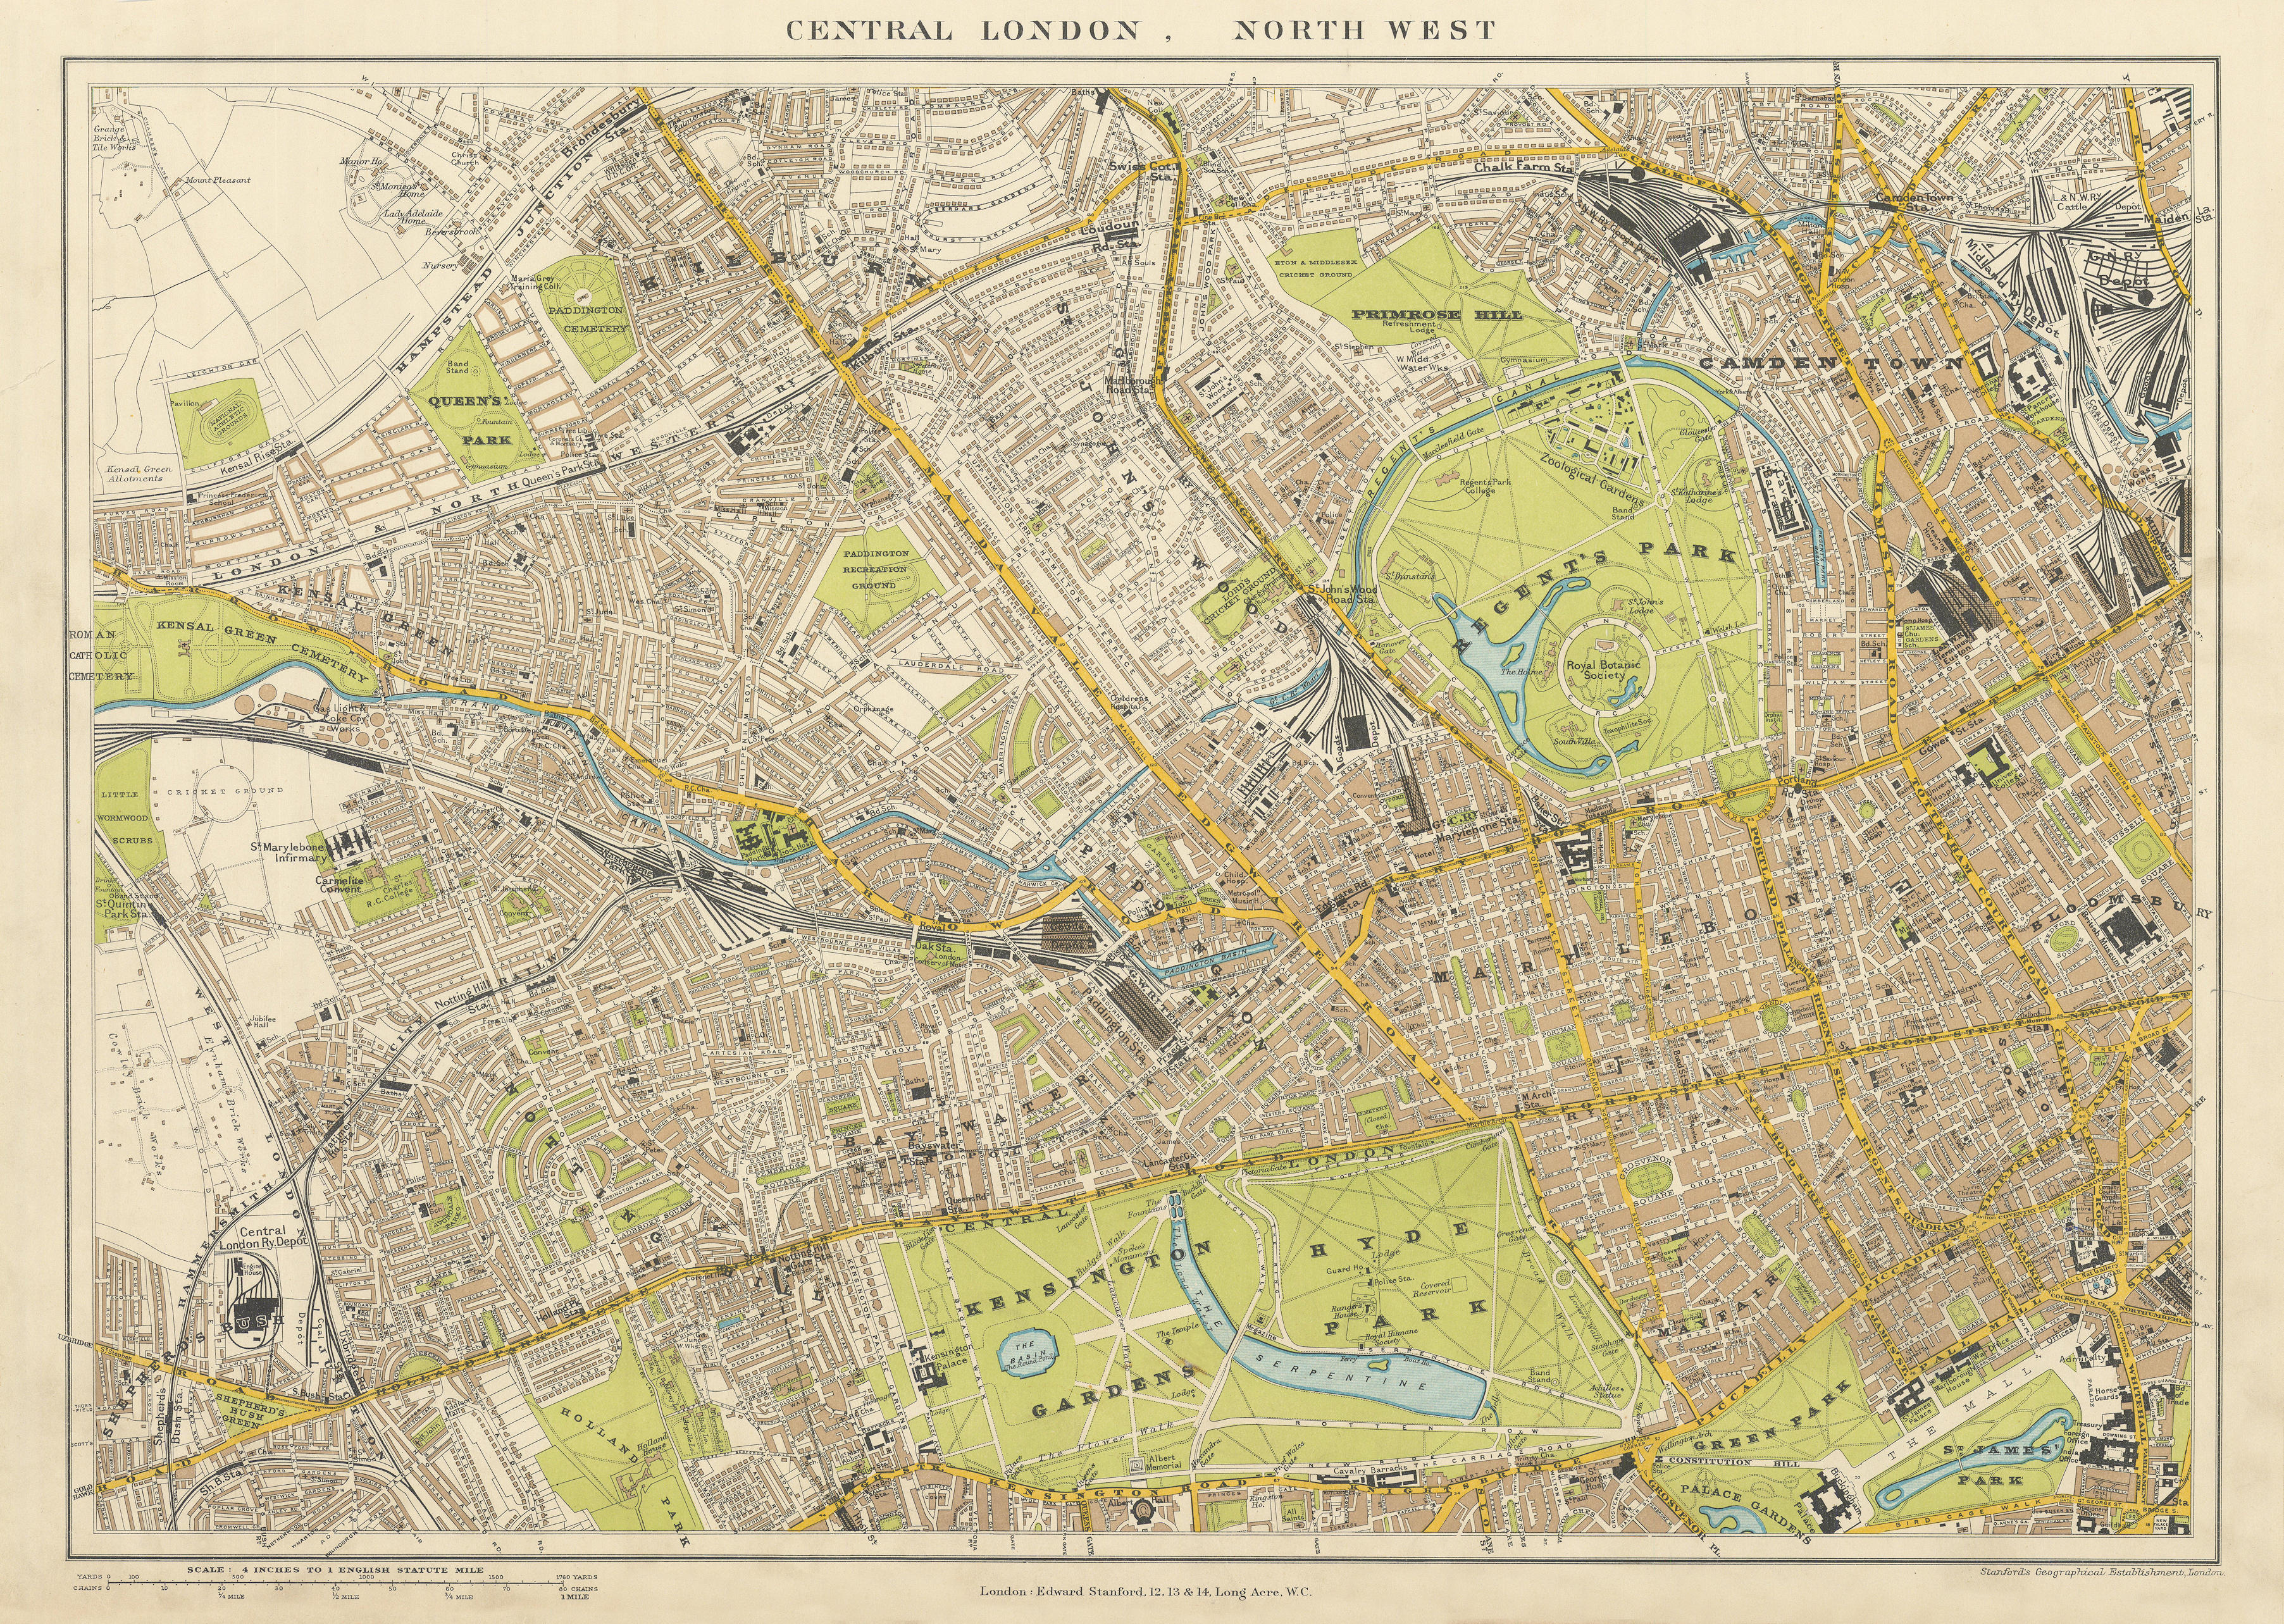 Associate Product Central London N.W. Camden Marylebone Mayfair Notting Hill. STANFORD 1904 map